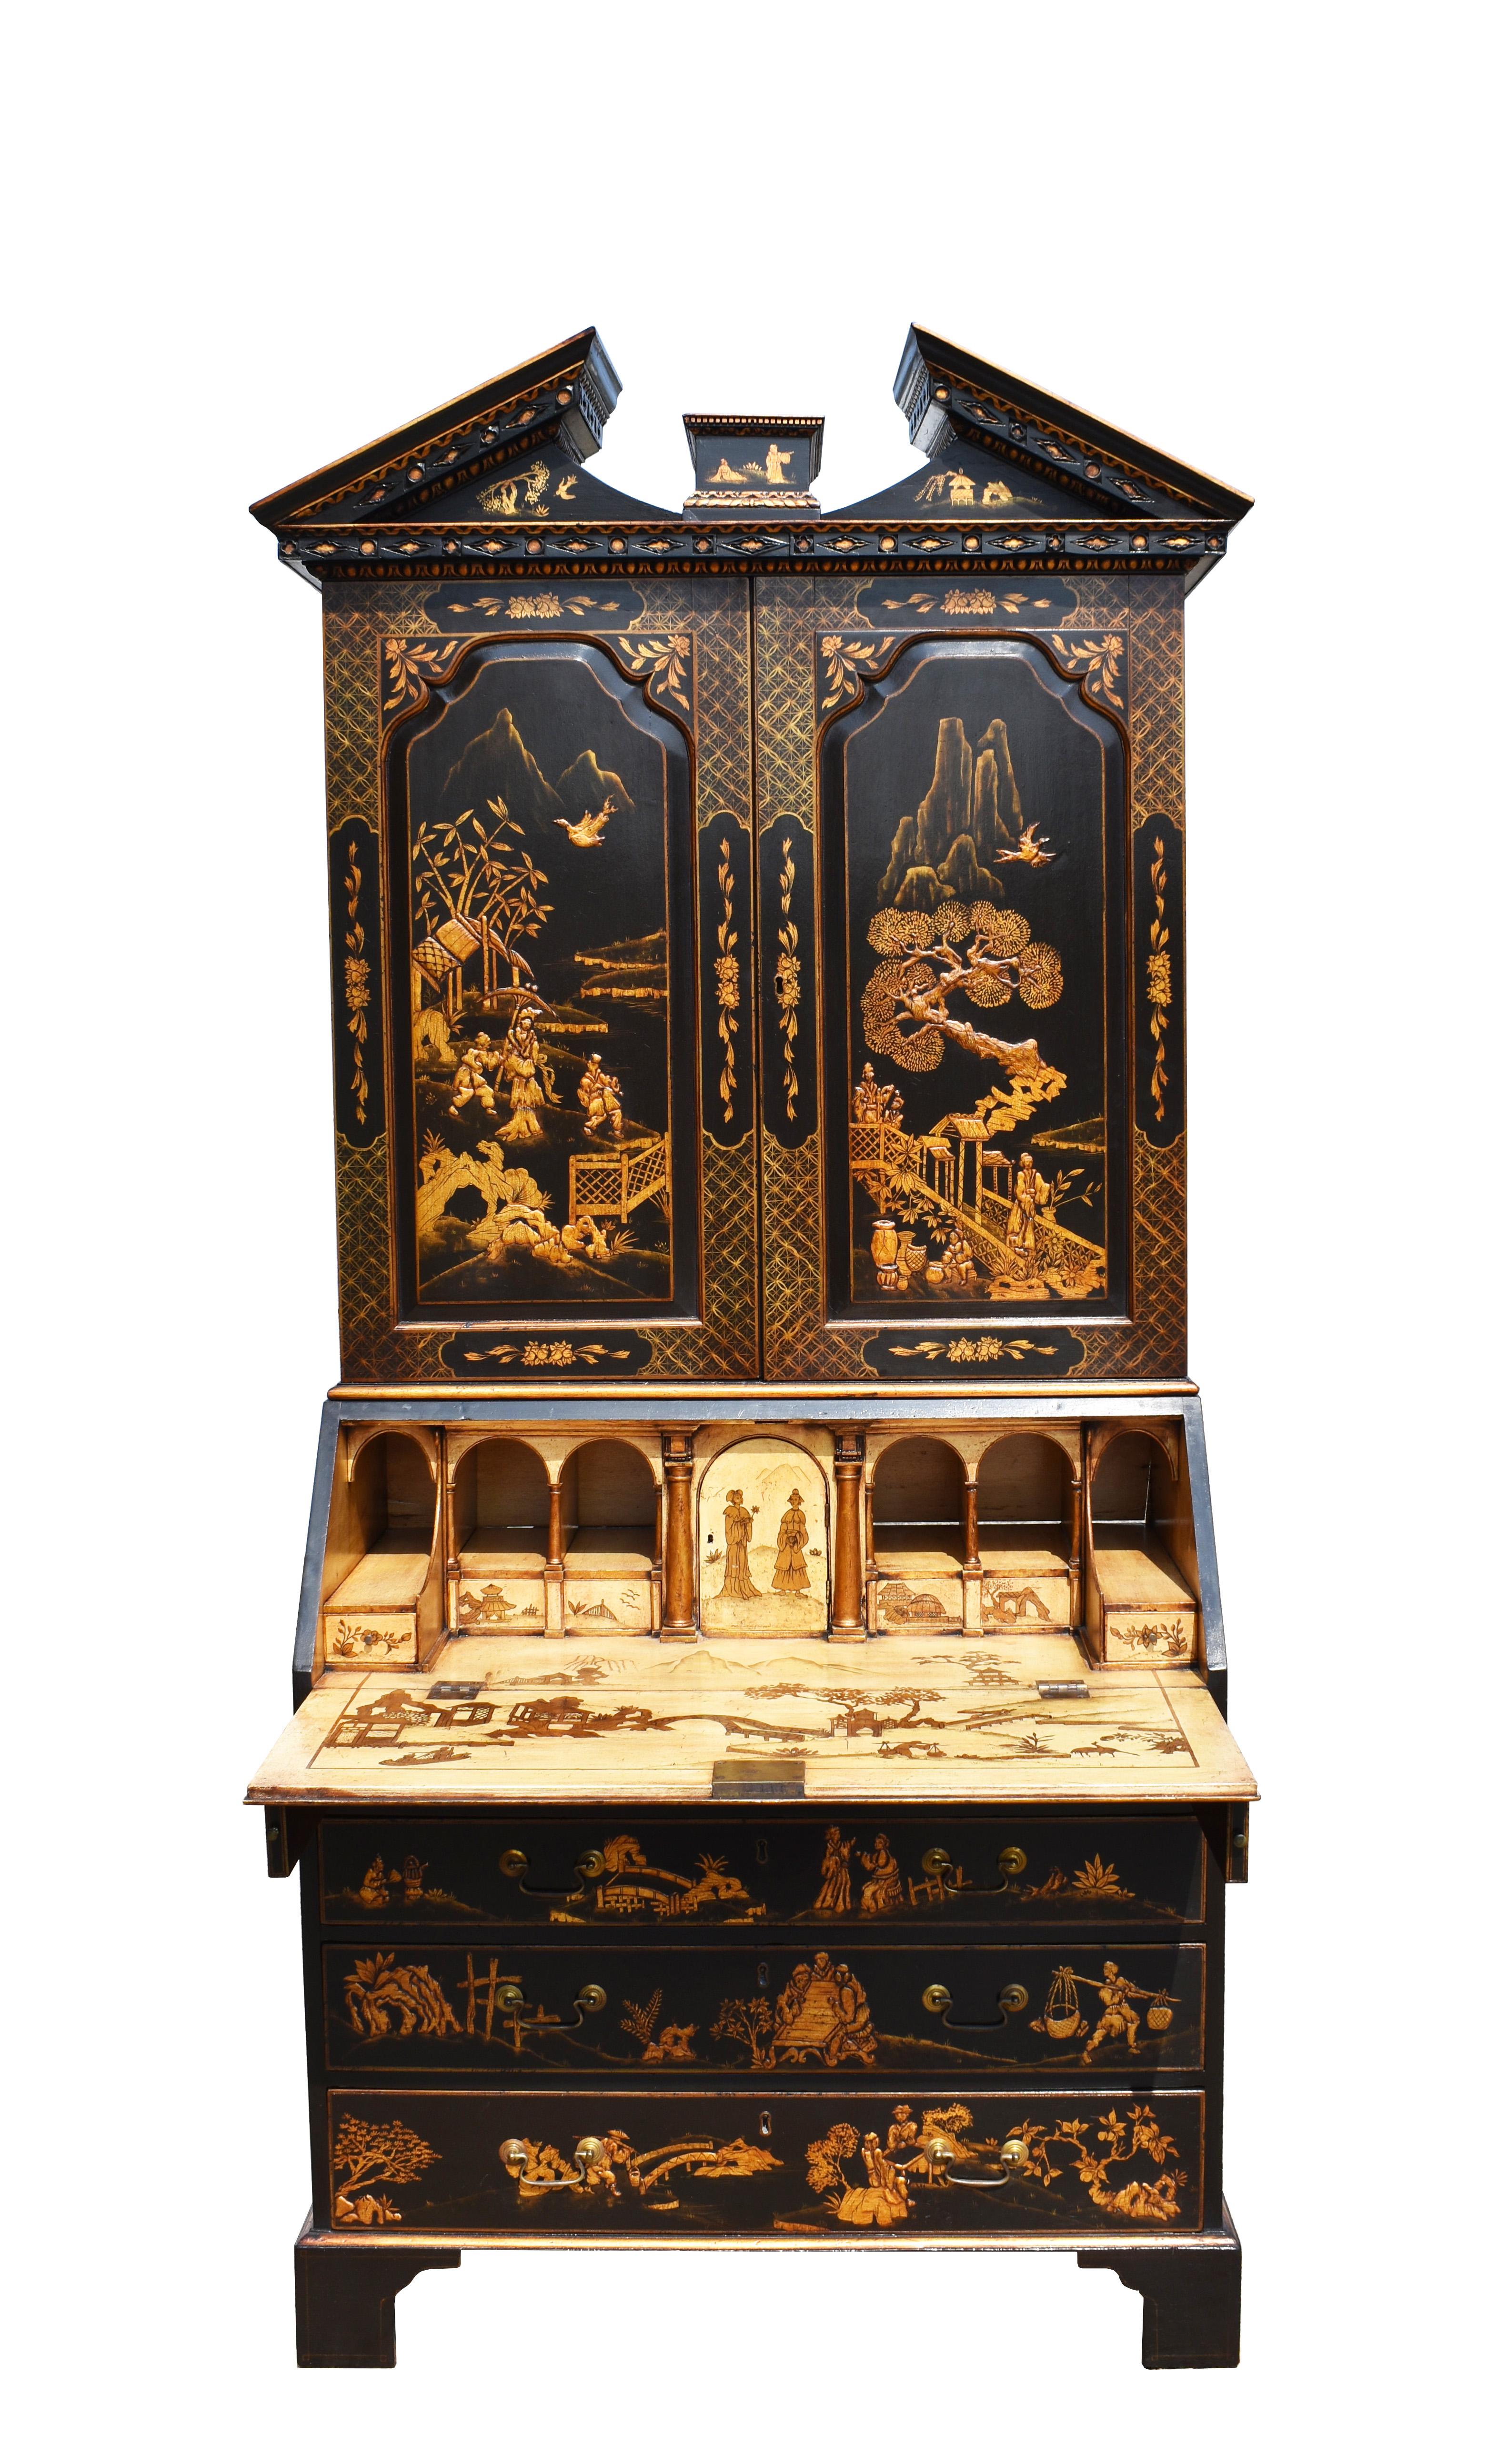 George II 18th Century English Lacquer and Gilt Chinoiserie Secretary Bookcase